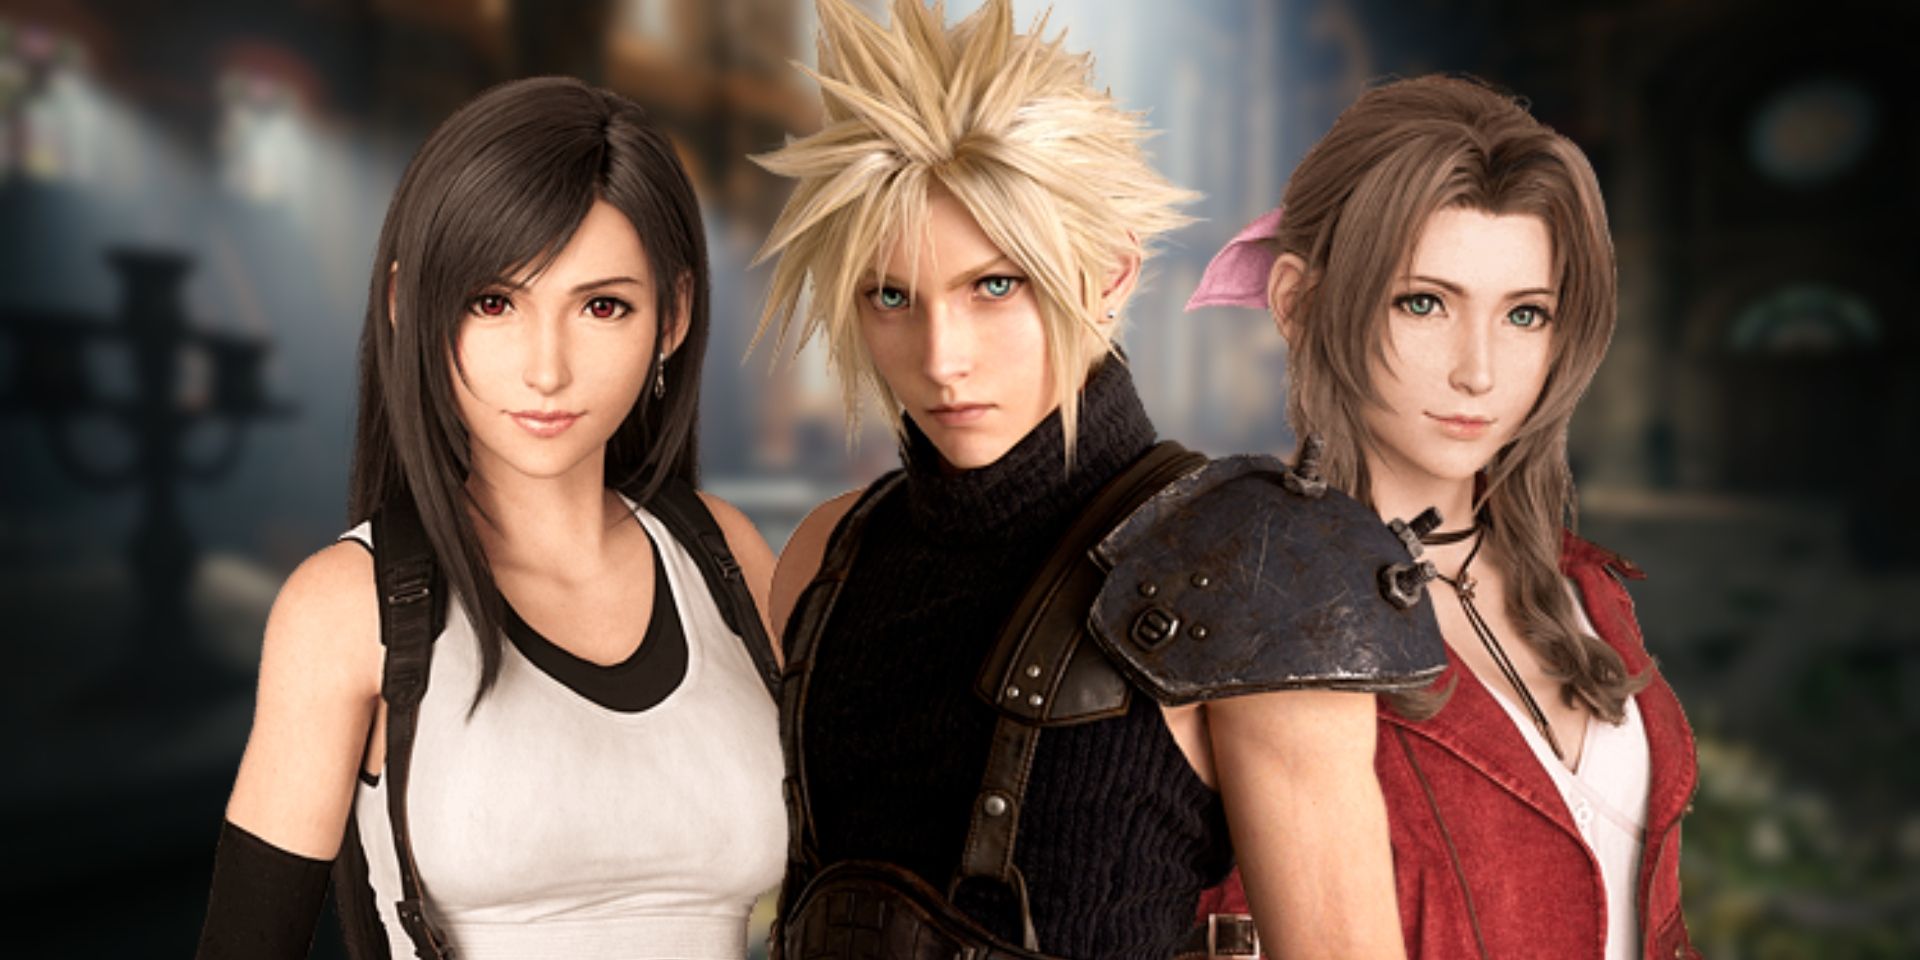 ff7 remake sony store